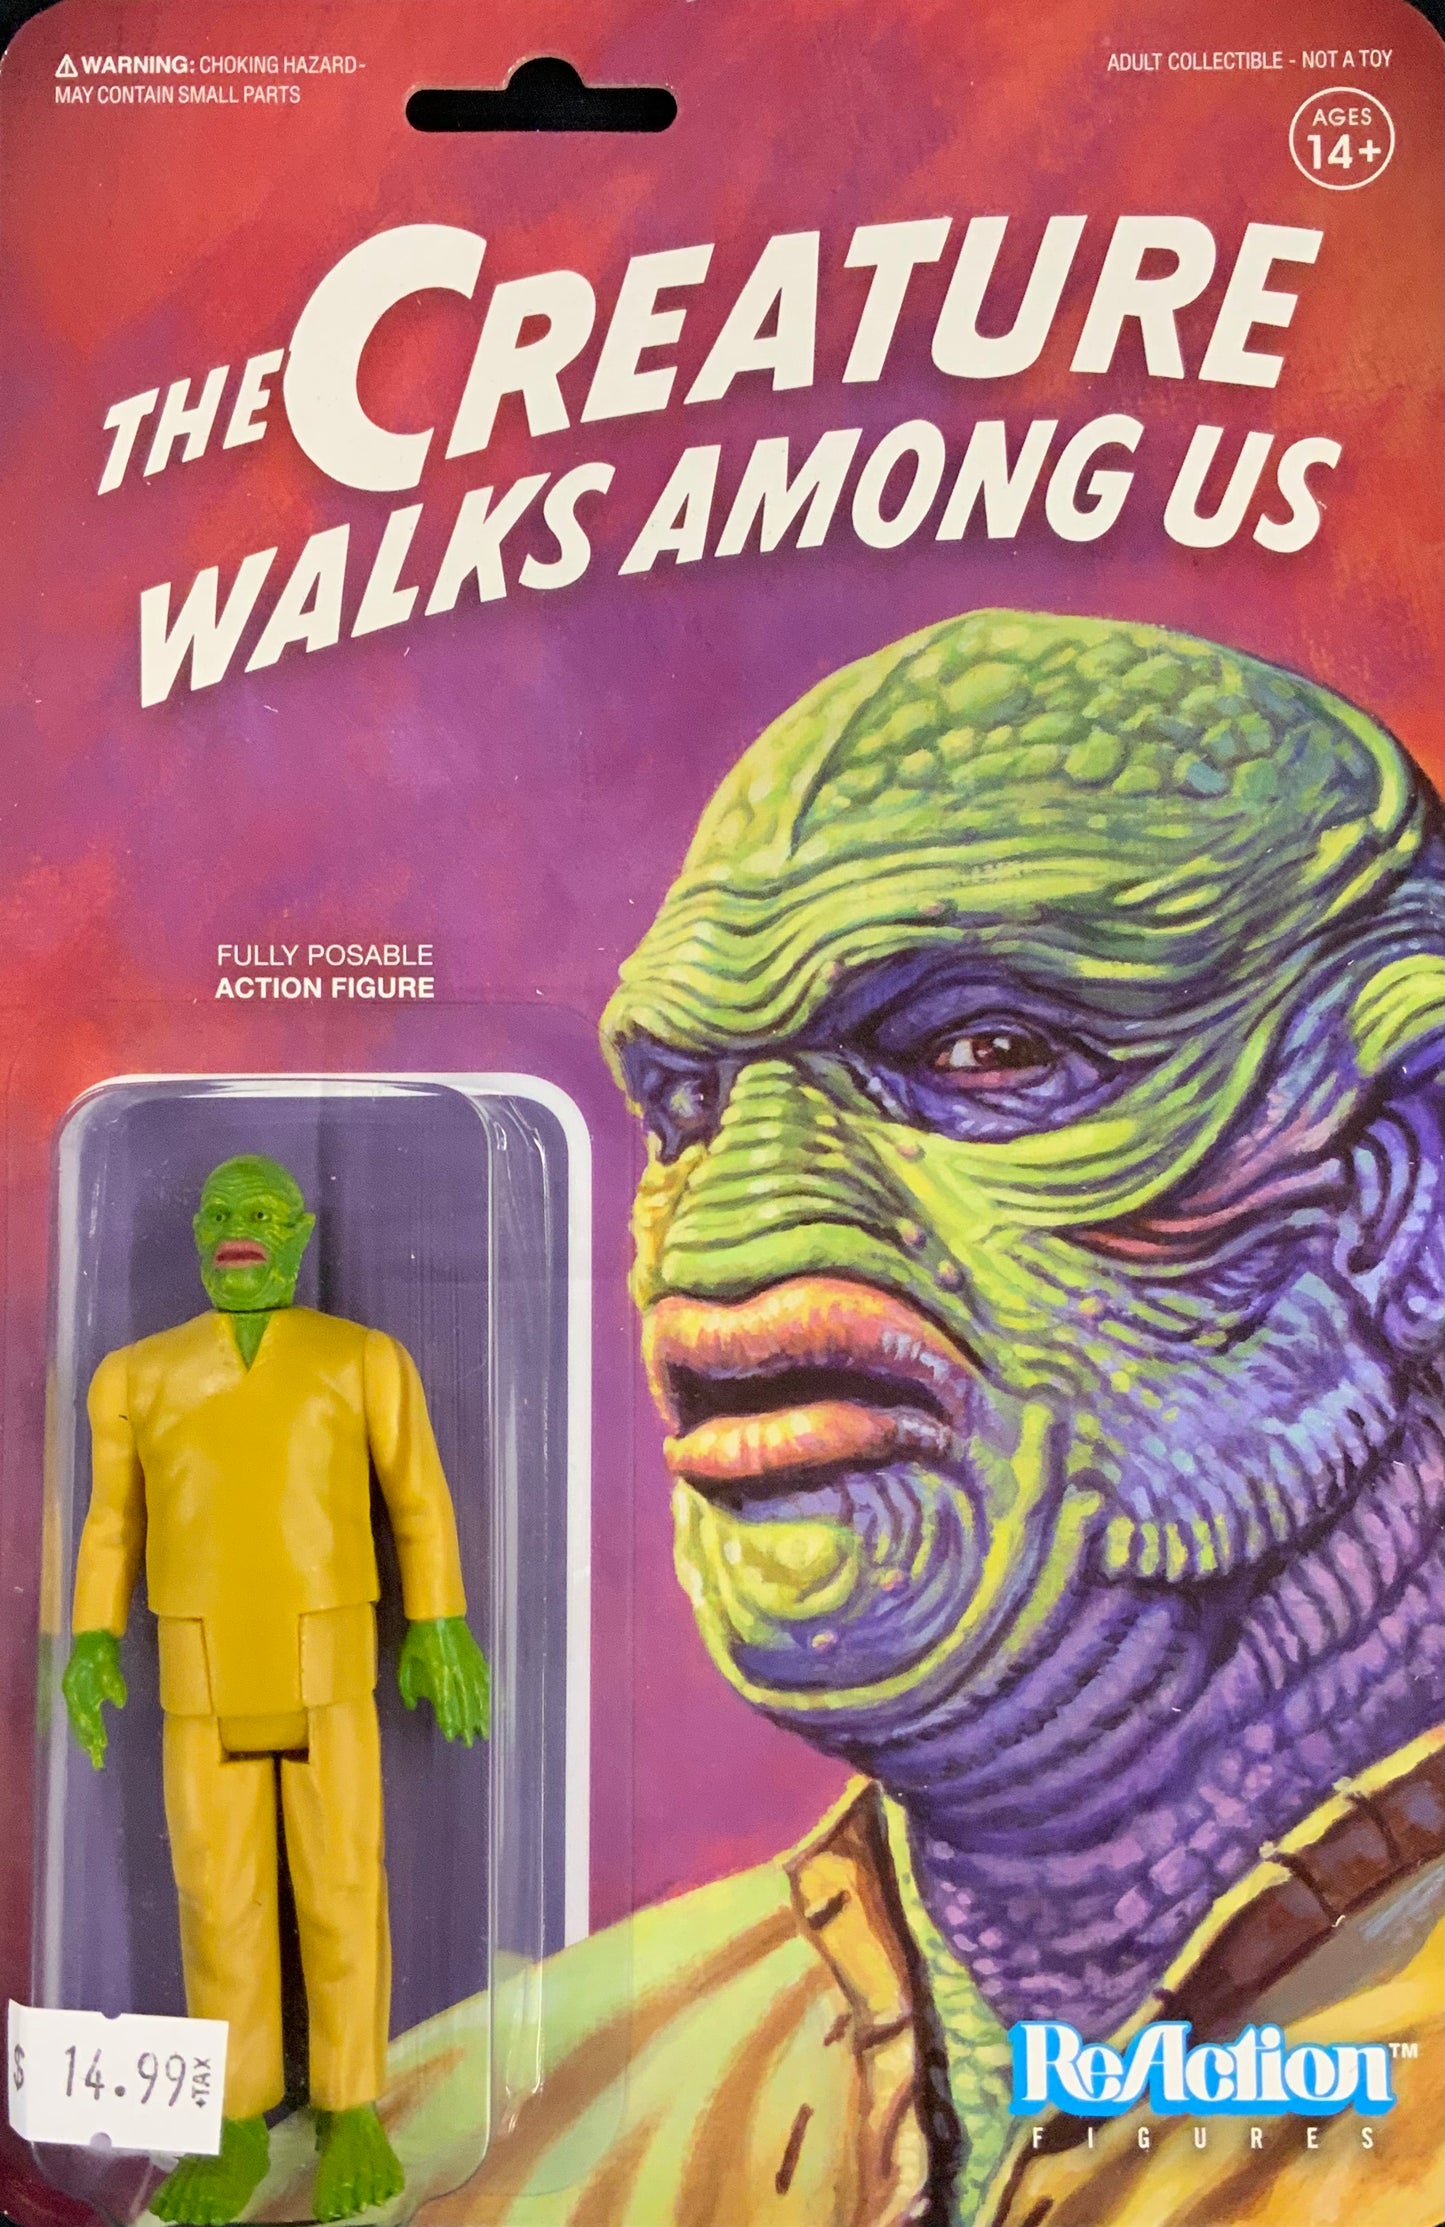 The Creature Walks Among Us: Creature From the Black Lagoon Action Figure